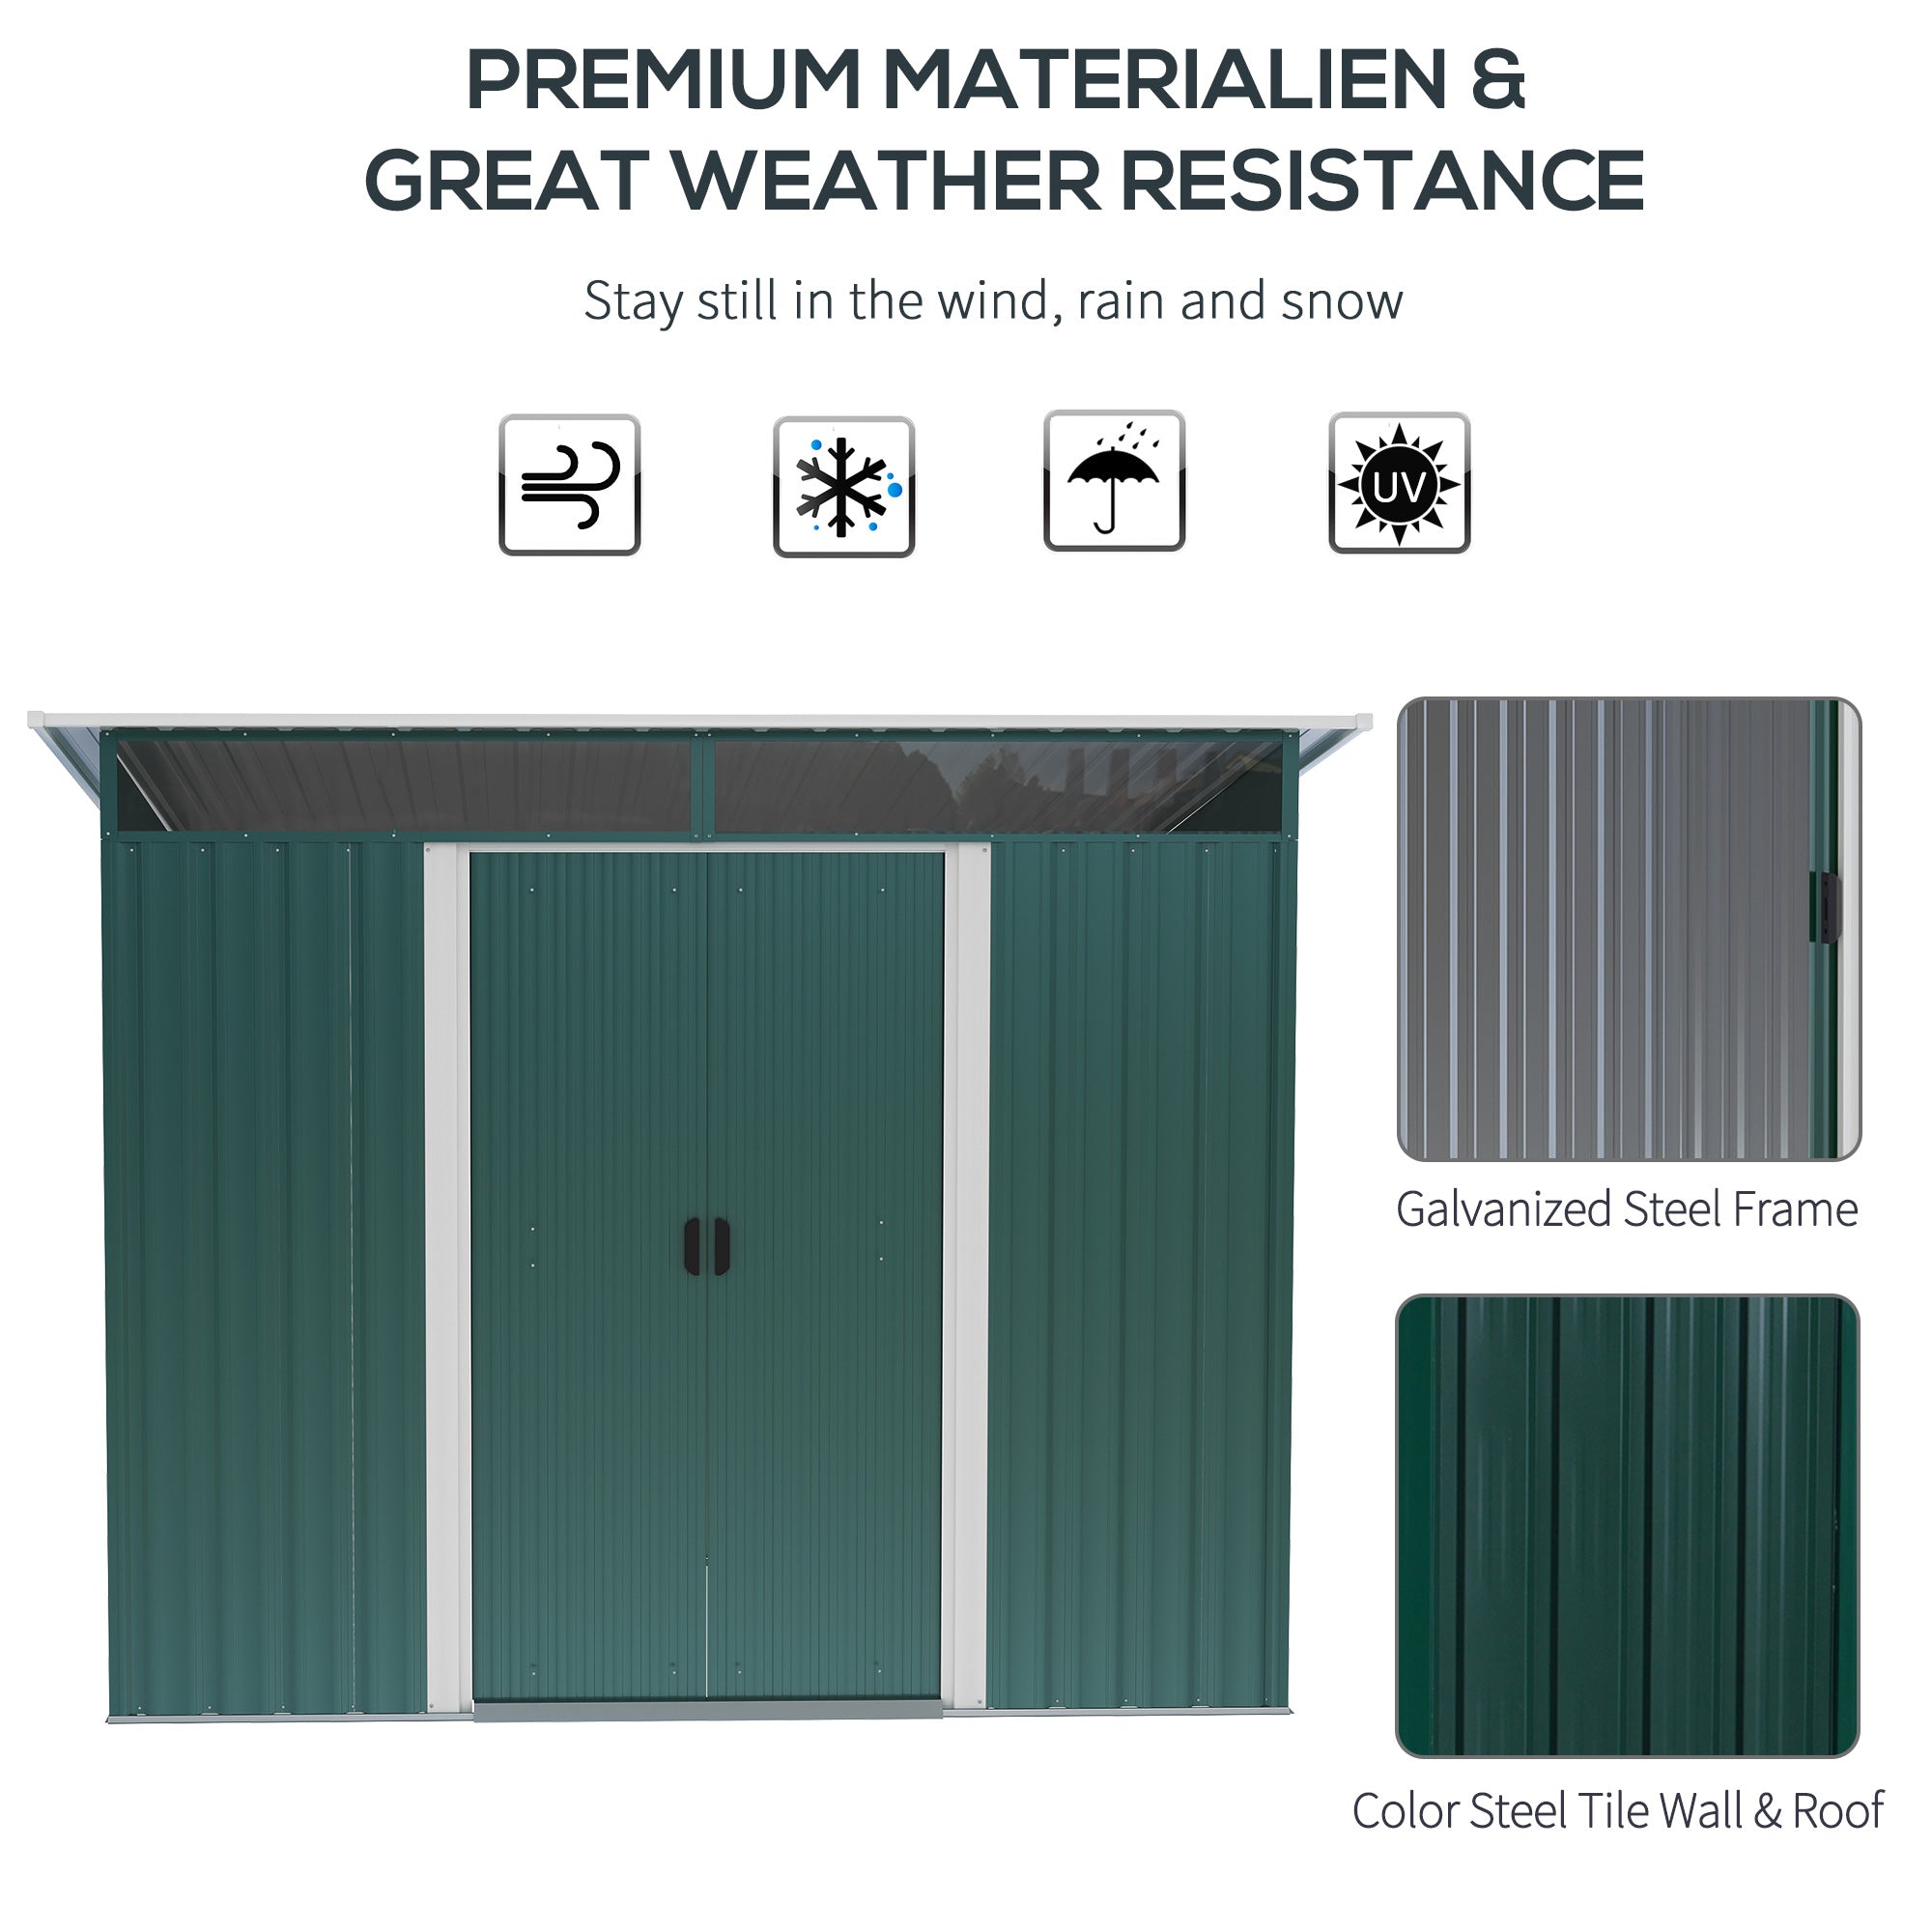 Outsunny Pent Roofed Metal Garden Shed House Hut Gardening Tool Storage w/ Ventilation 260L x 194W x 200H cm - Inspirely